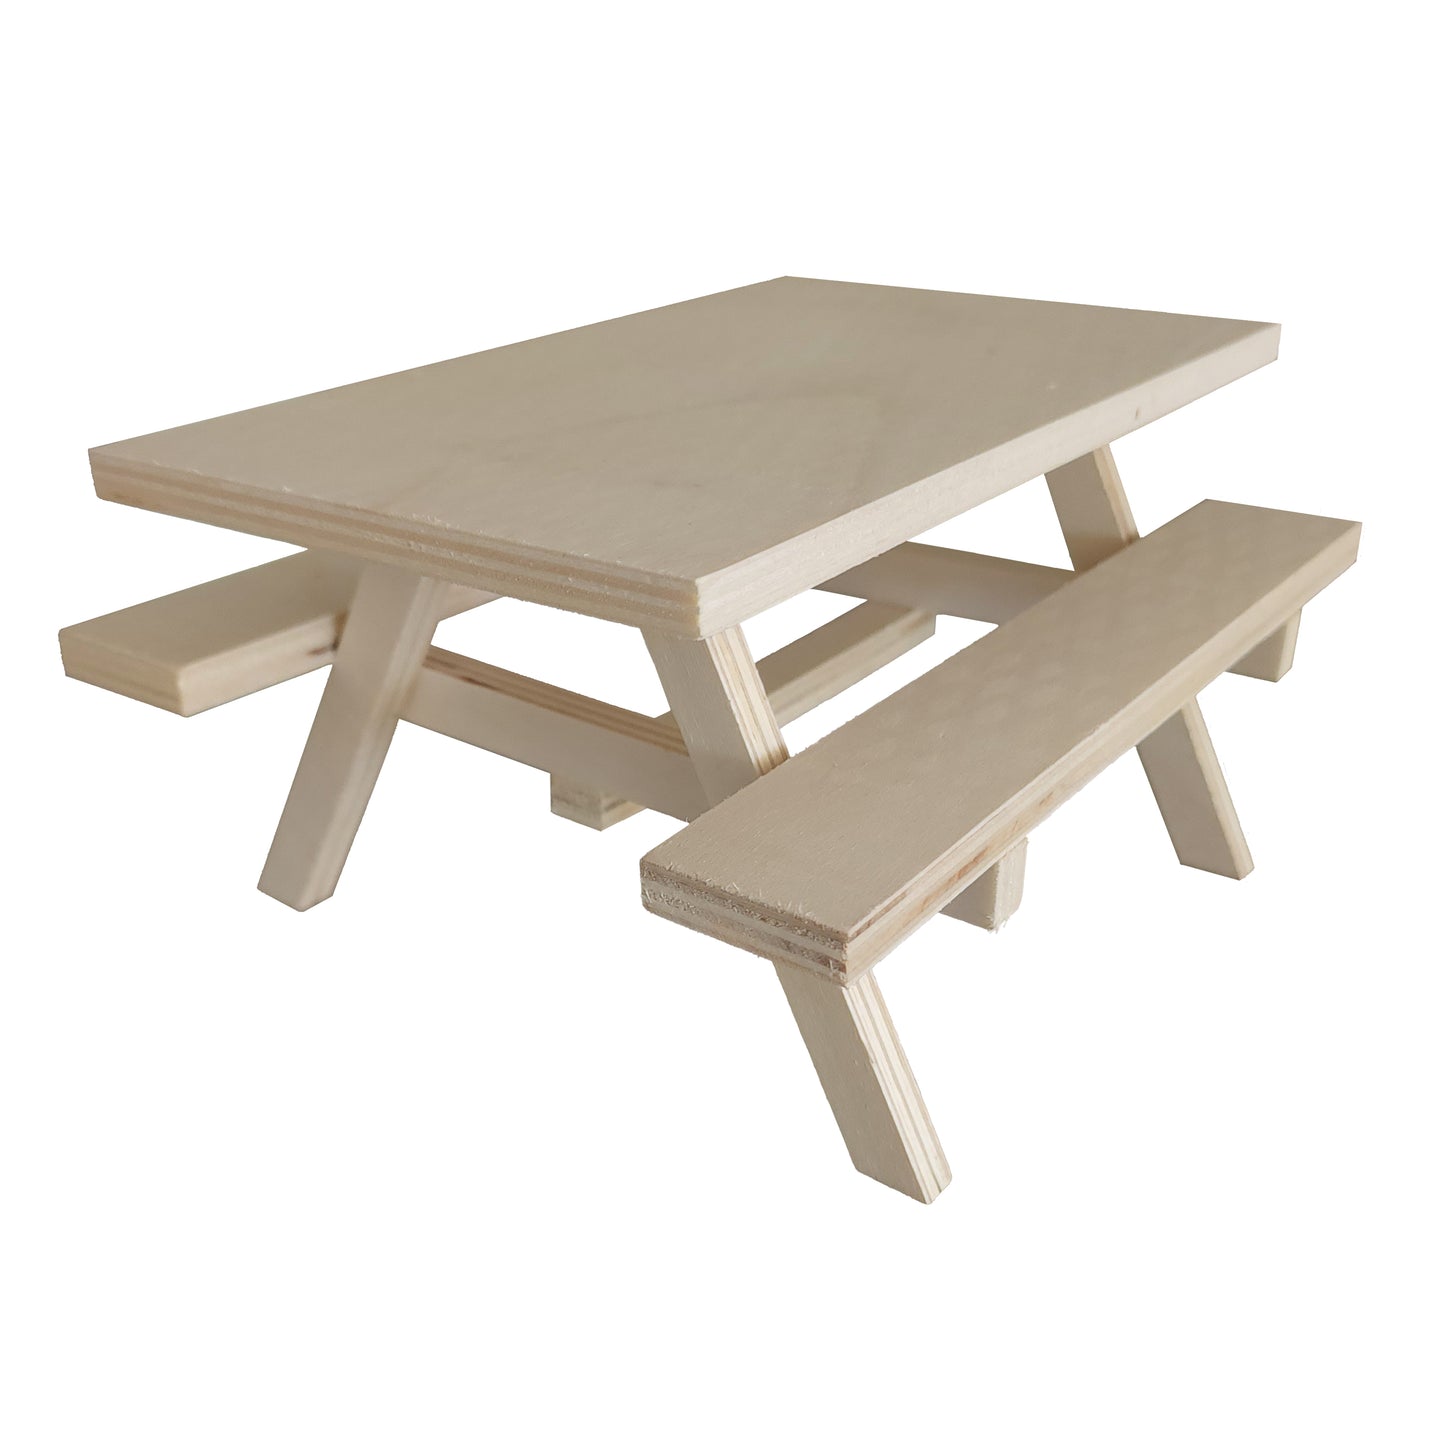 Wooden picnic table for elves with minor imperfections